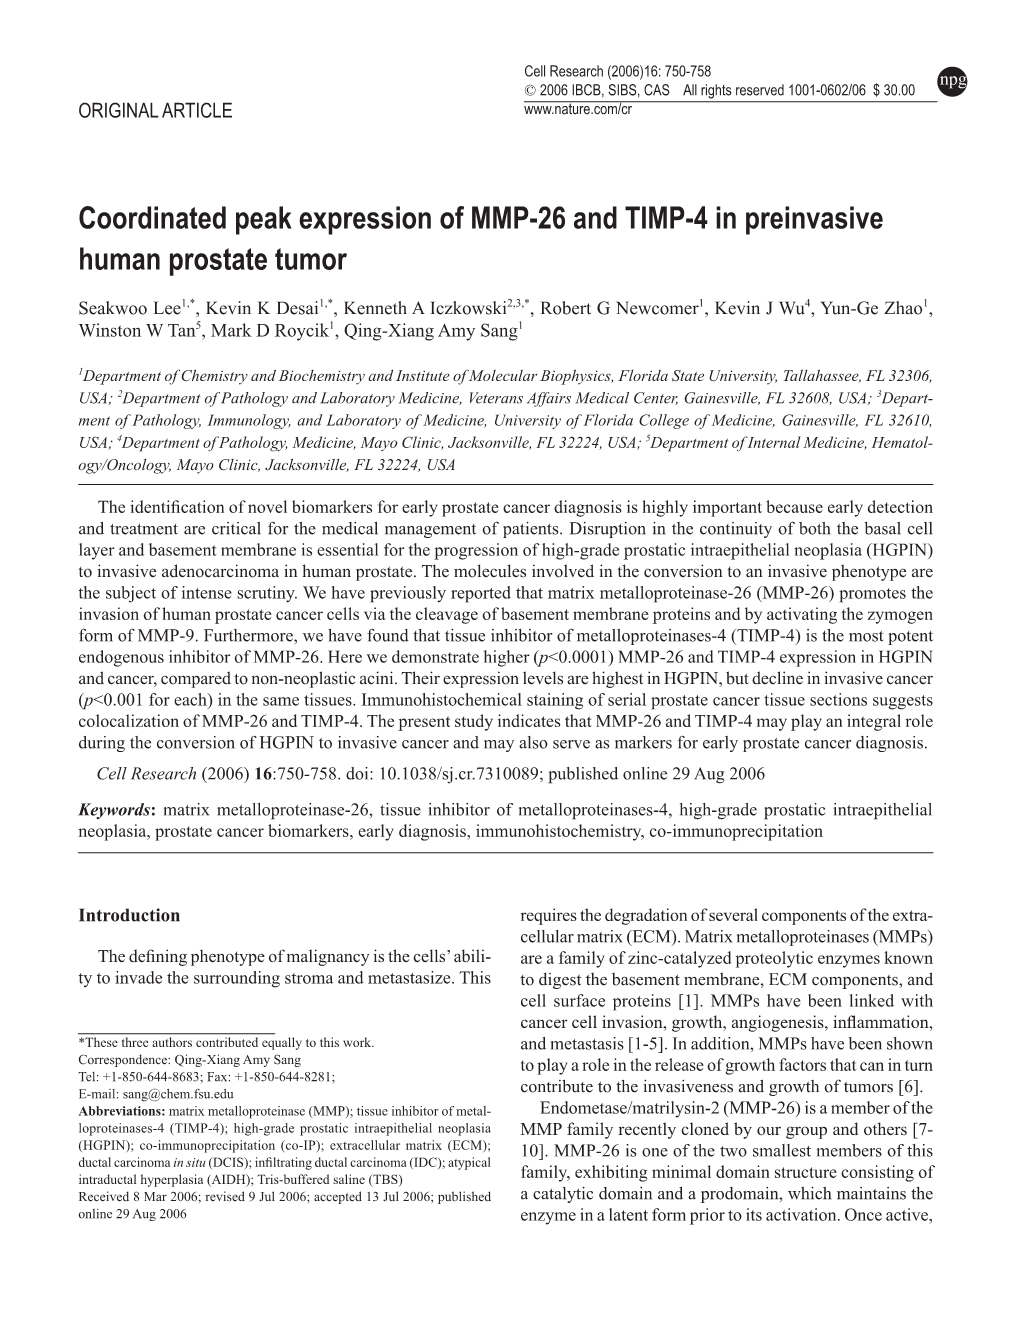 Coordinated Peak Expression of MMP-26 and TIMP-4 in Preinvasive Human Prostate Tumor